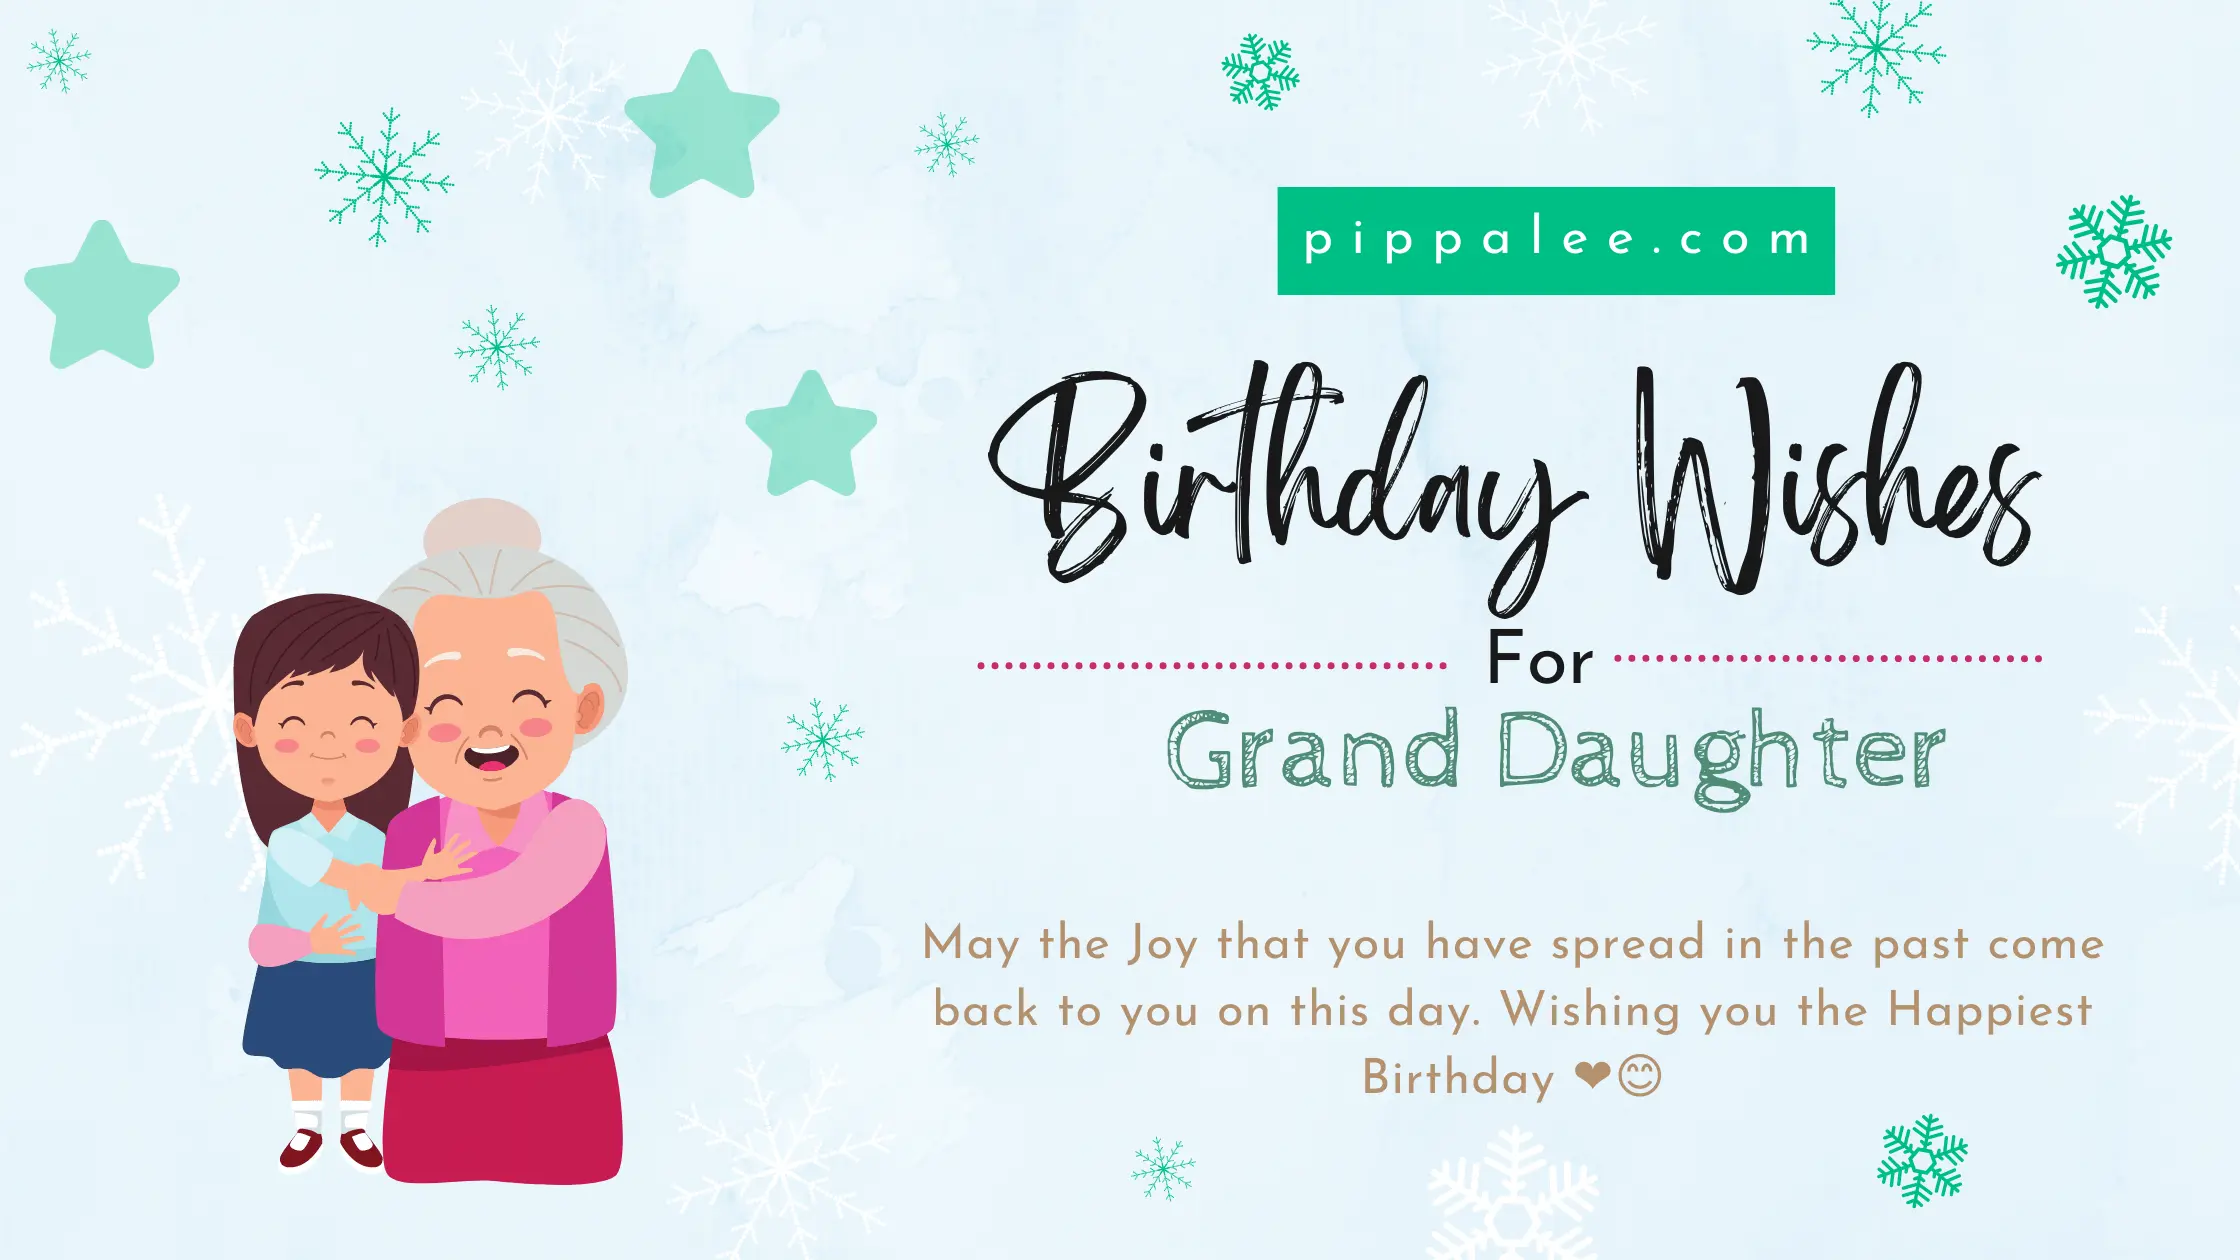 Birthday Wishes For Grand Daughter - Wishes & Messages